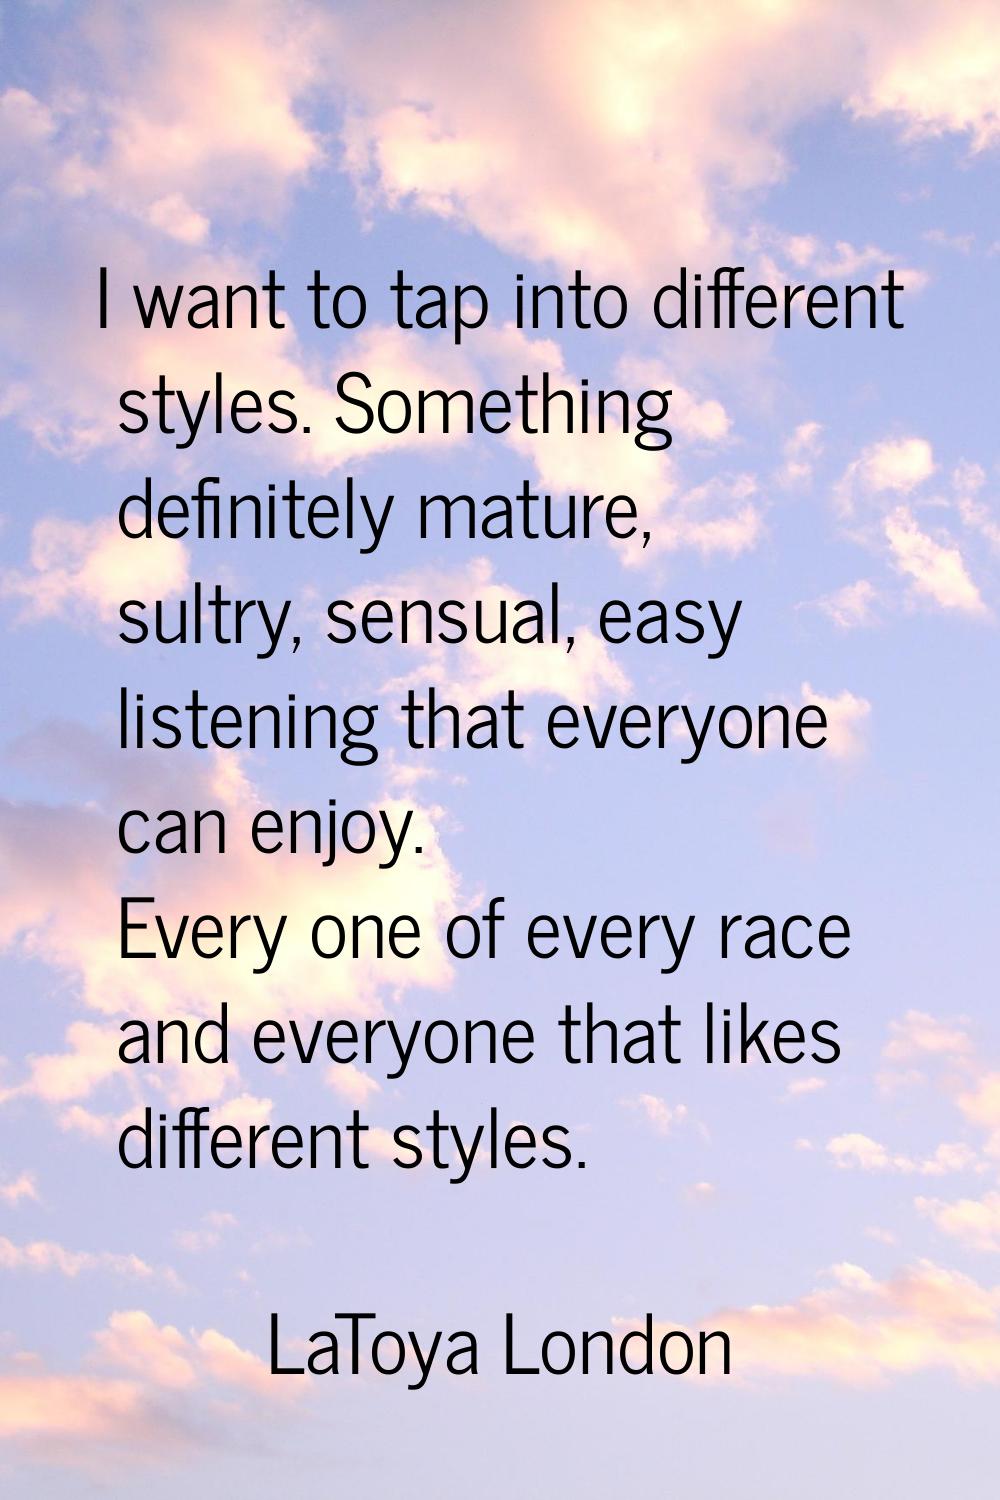 I want to tap into different styles. Something definitely mature, sultry, sensual, easy listening t